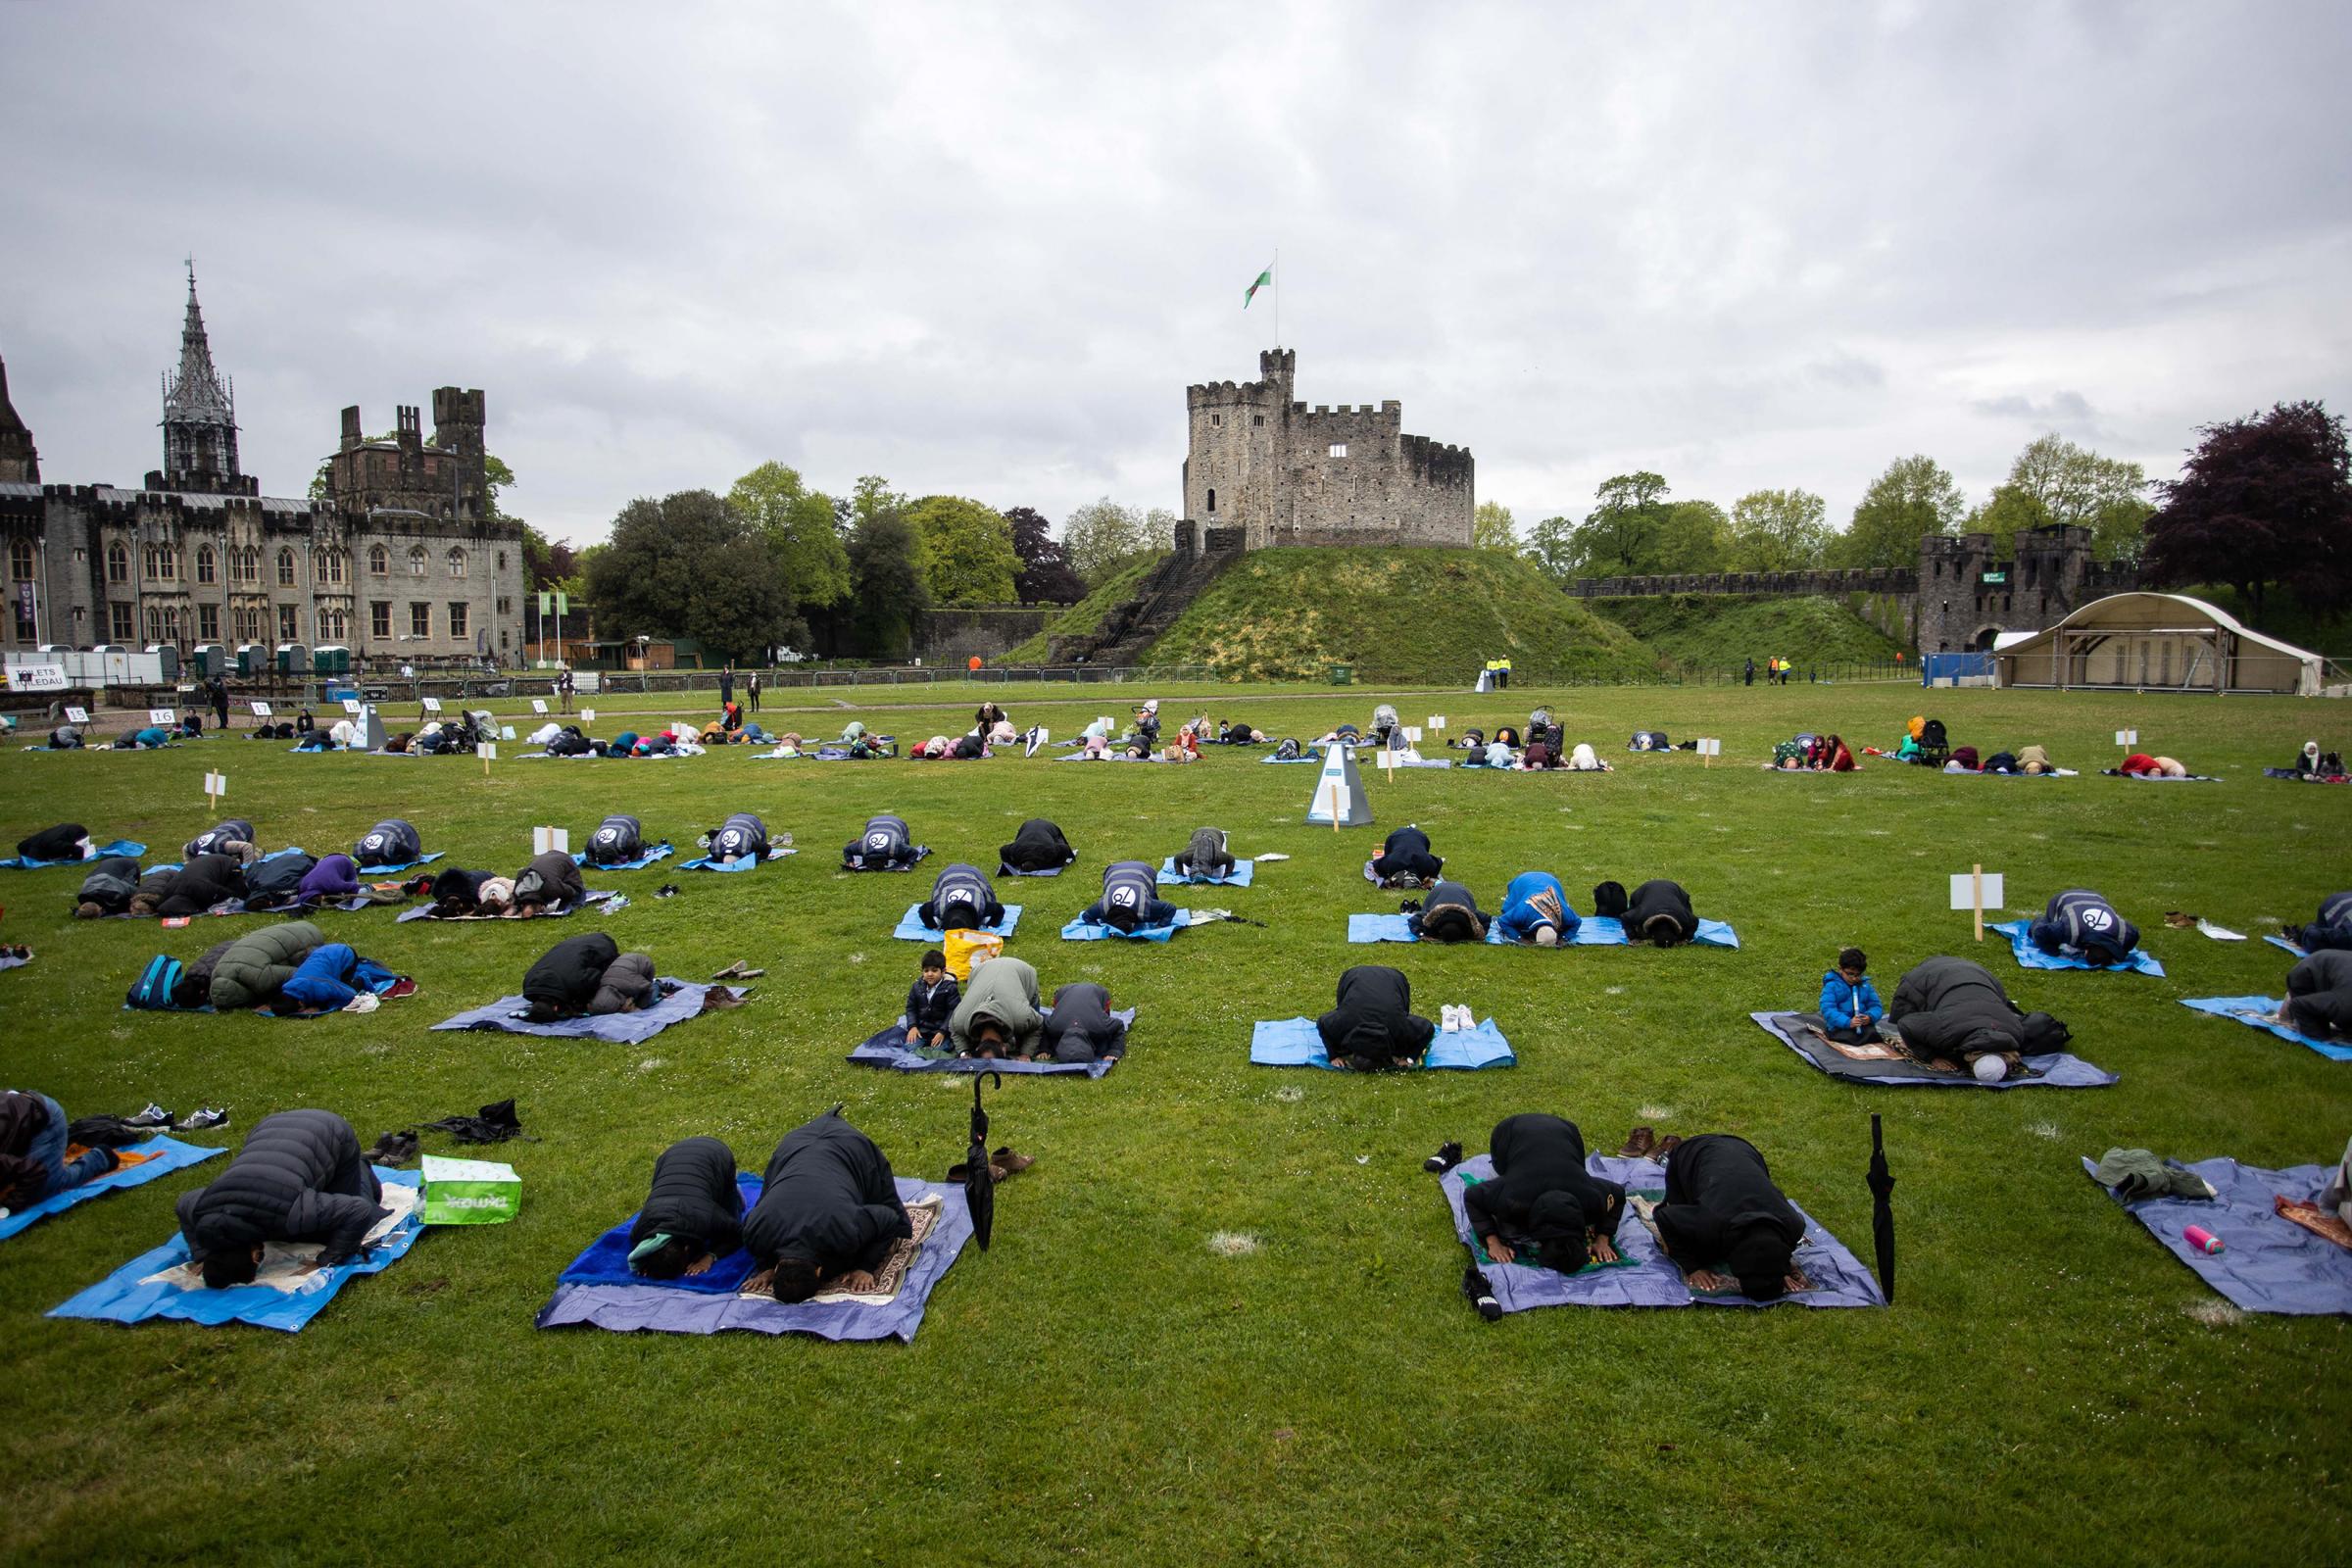 13.05.21 - Picture shows Eid-al-Fitr taking part at Cardiff Castle, Wales, which marks the end of Ramadan. The event is being used as a Welsh Government pilot scheme to have people attending events. 95 adults were in attendance, not including children